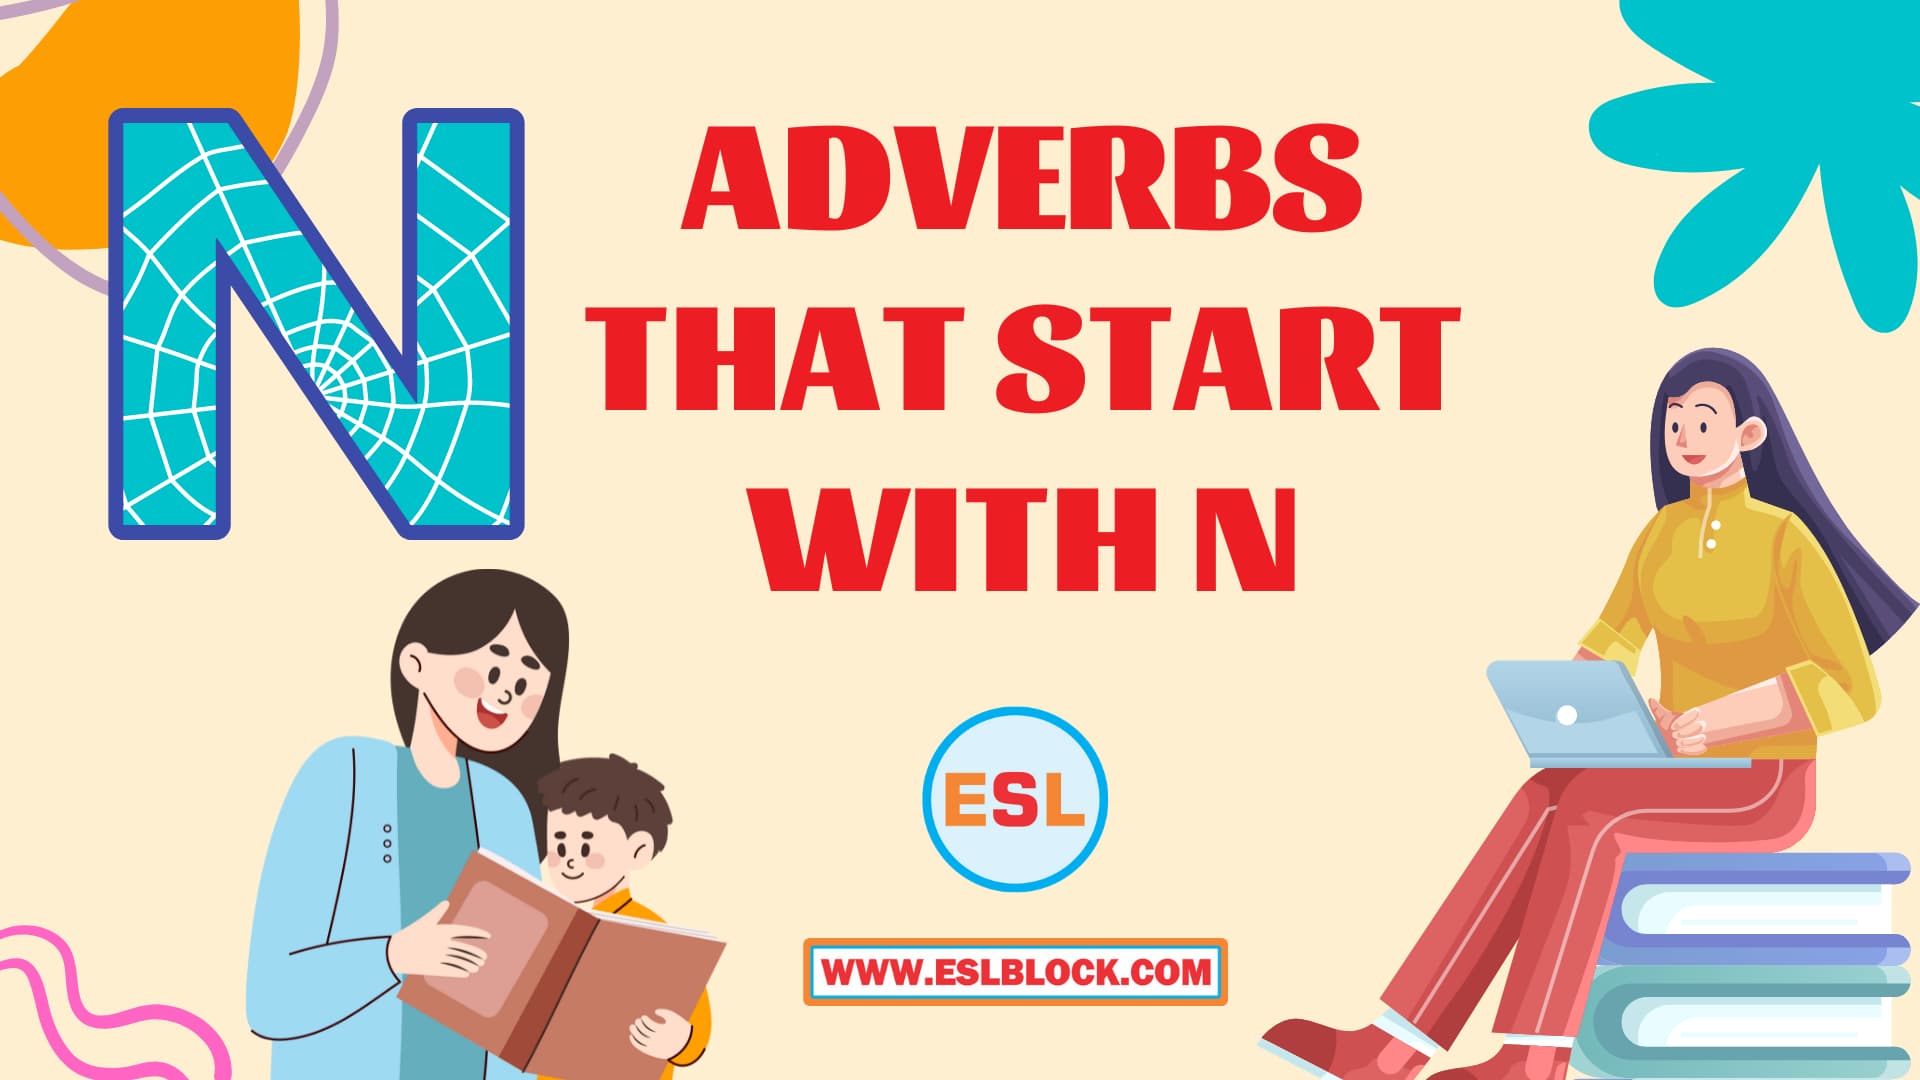 100 Example Sentences Using Adverbs, 4 Letter Adverbs That Start with N, 4 Letter Words, 5 Letter Adverbs That Start with N, 5 Letter Words, 6 Letter Adverbs That Start with N, 6 Letter Words, A to Z Adverbs, AA Adverbs, Adverb vocabulary words, Adverbs, Adverbs That Start with N, Adverbs with Example Sentences, All Adverbs, Types of Adverbs, Types of Adverbs with Example Sentences, Vocabulary, What are Adverbs, What are the types of Adverbs, Words That with N